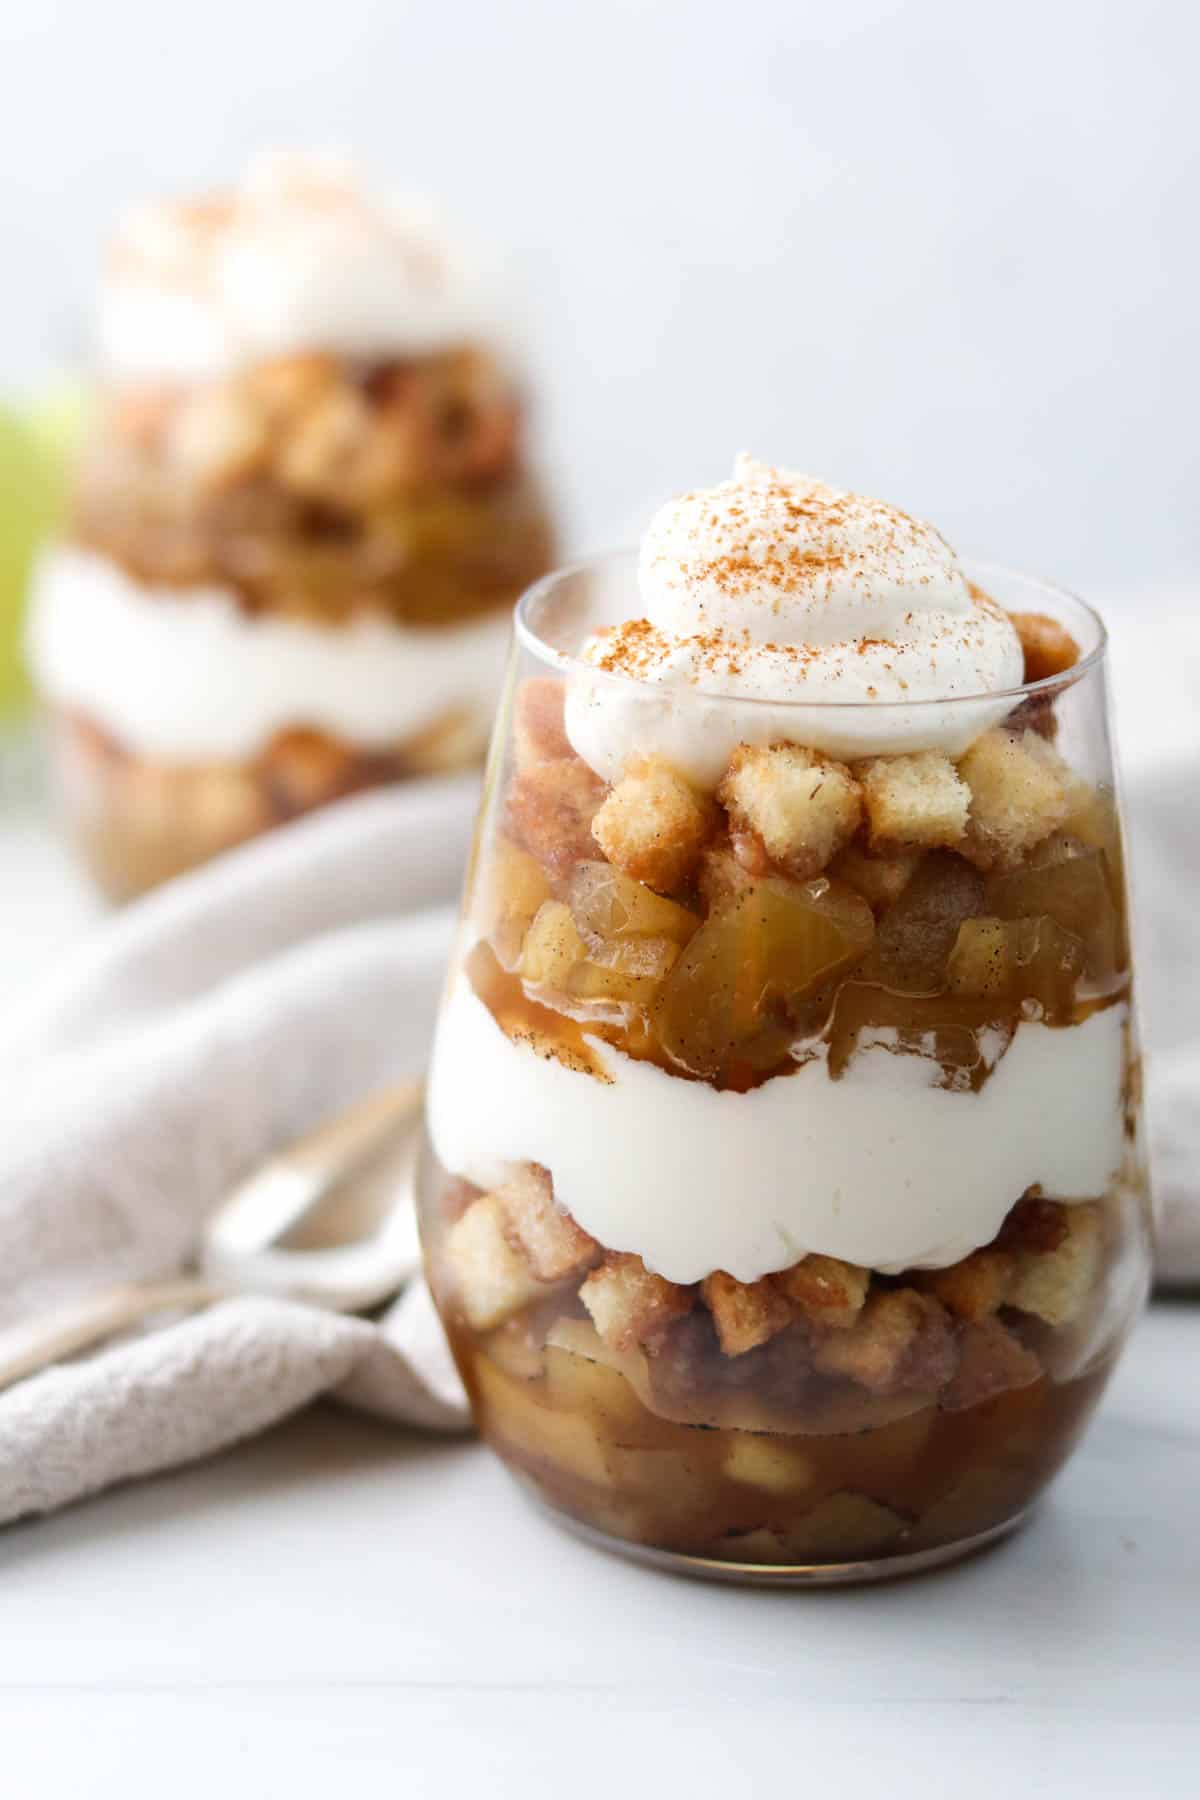 Apple trifle with whipped cream next to a napkin and spoon.